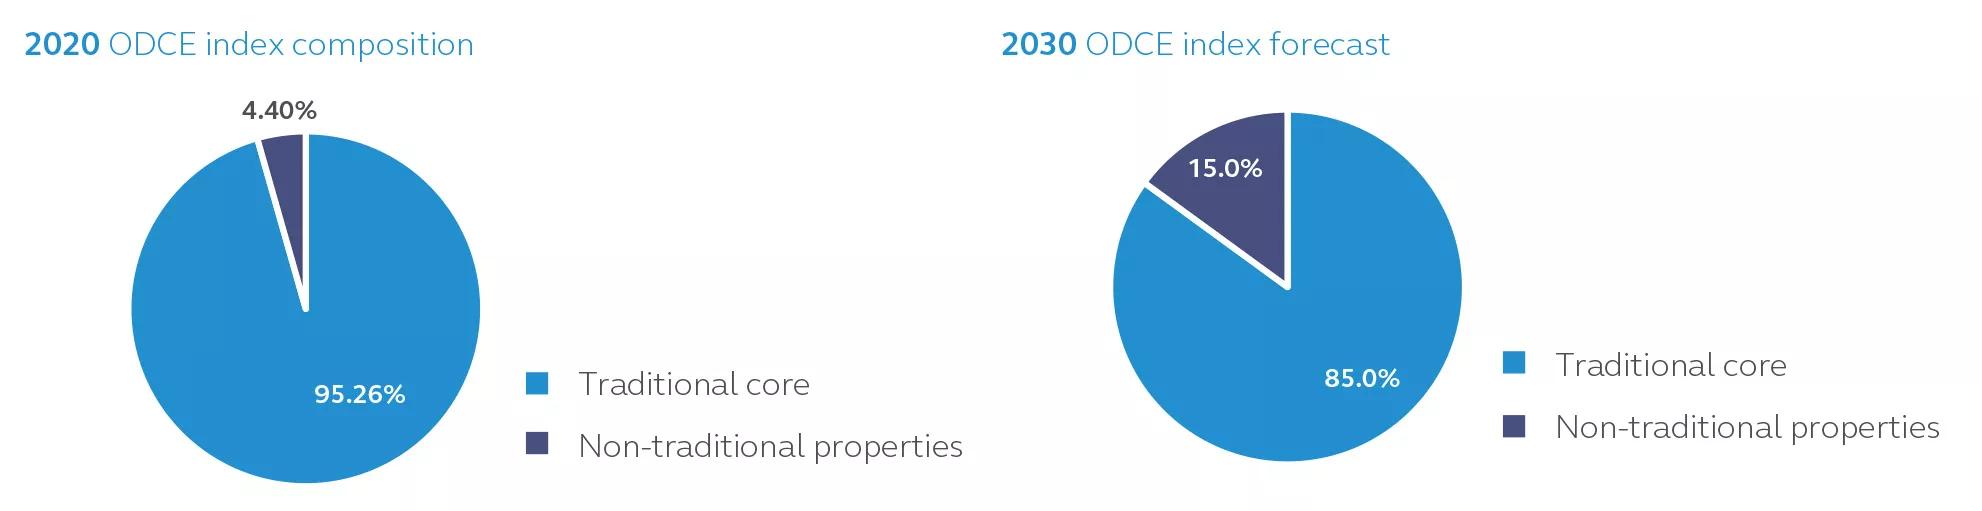 Two pie charts showing the forecasted increase in non-traditional property types in the NCREIF ODCE index from 2020 to 2030